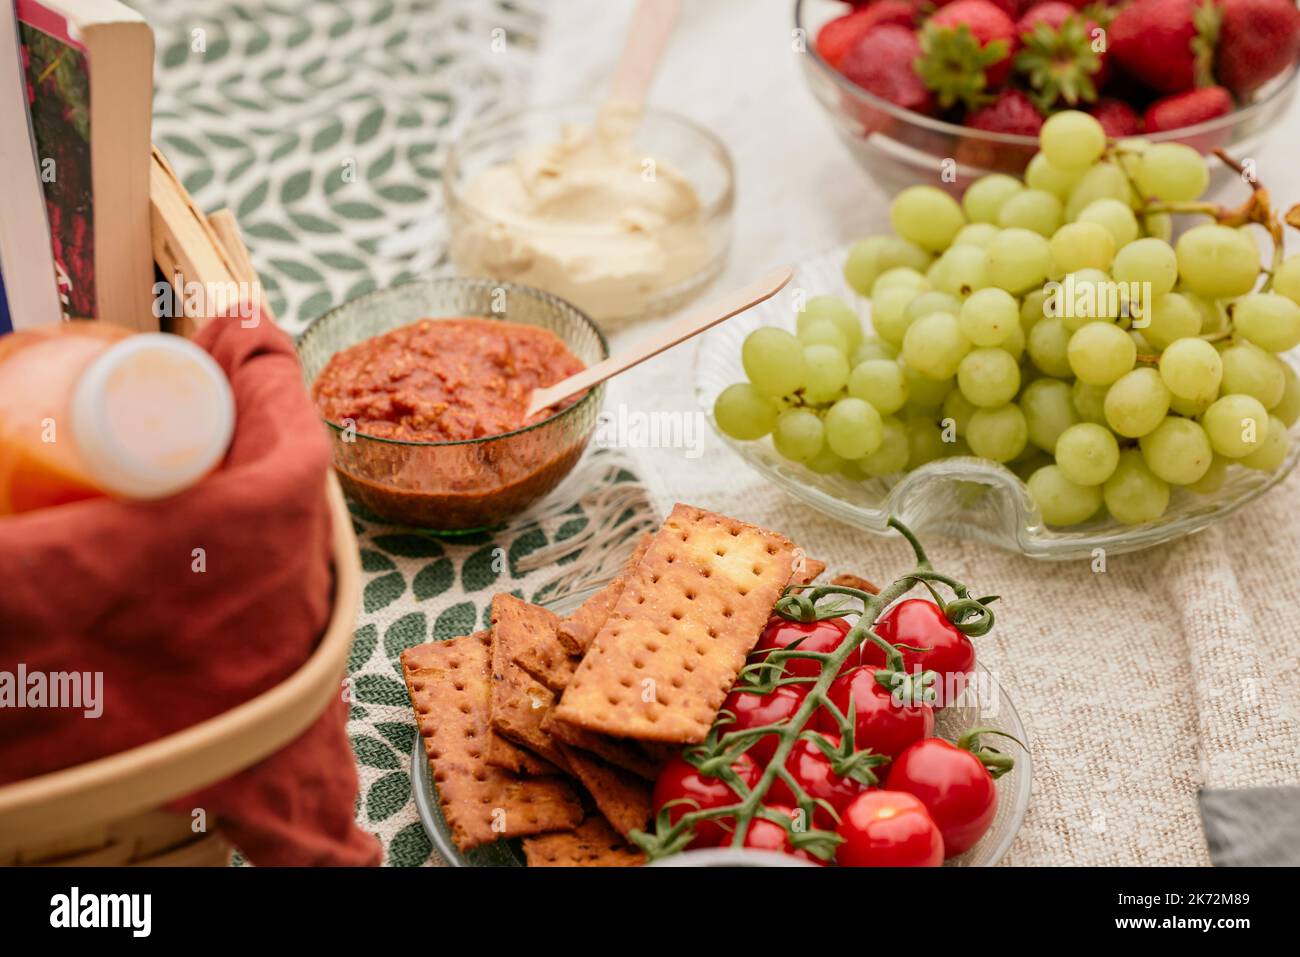 Fruit, vegetables, and crackers on picnic blanket Stock Photo